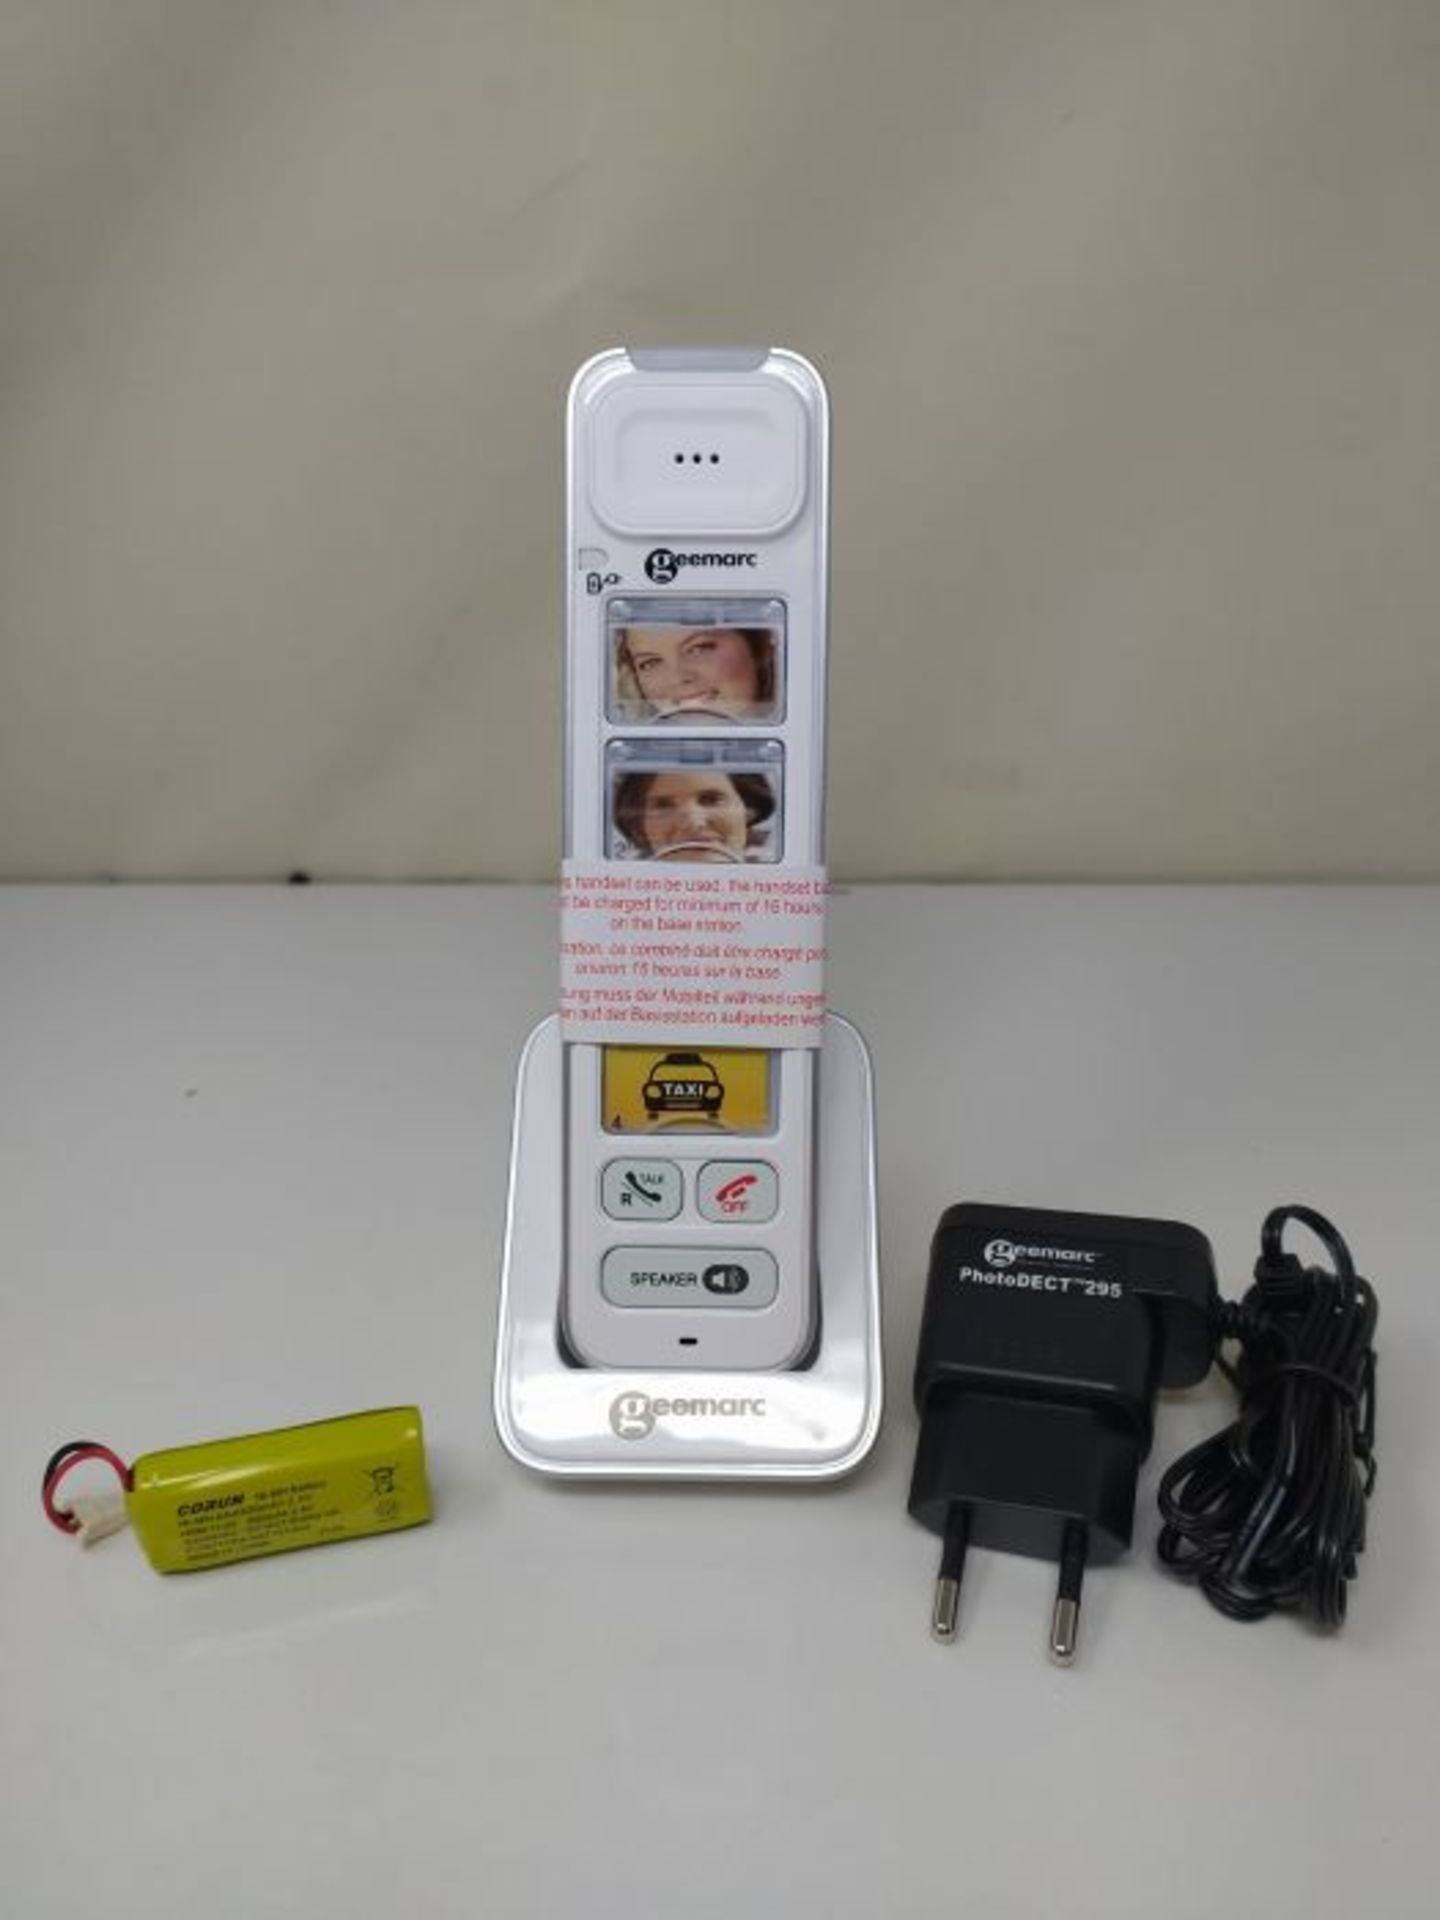 Geemarc PHOTODECT 295 - extra extra handset - white - Image 3 of 3